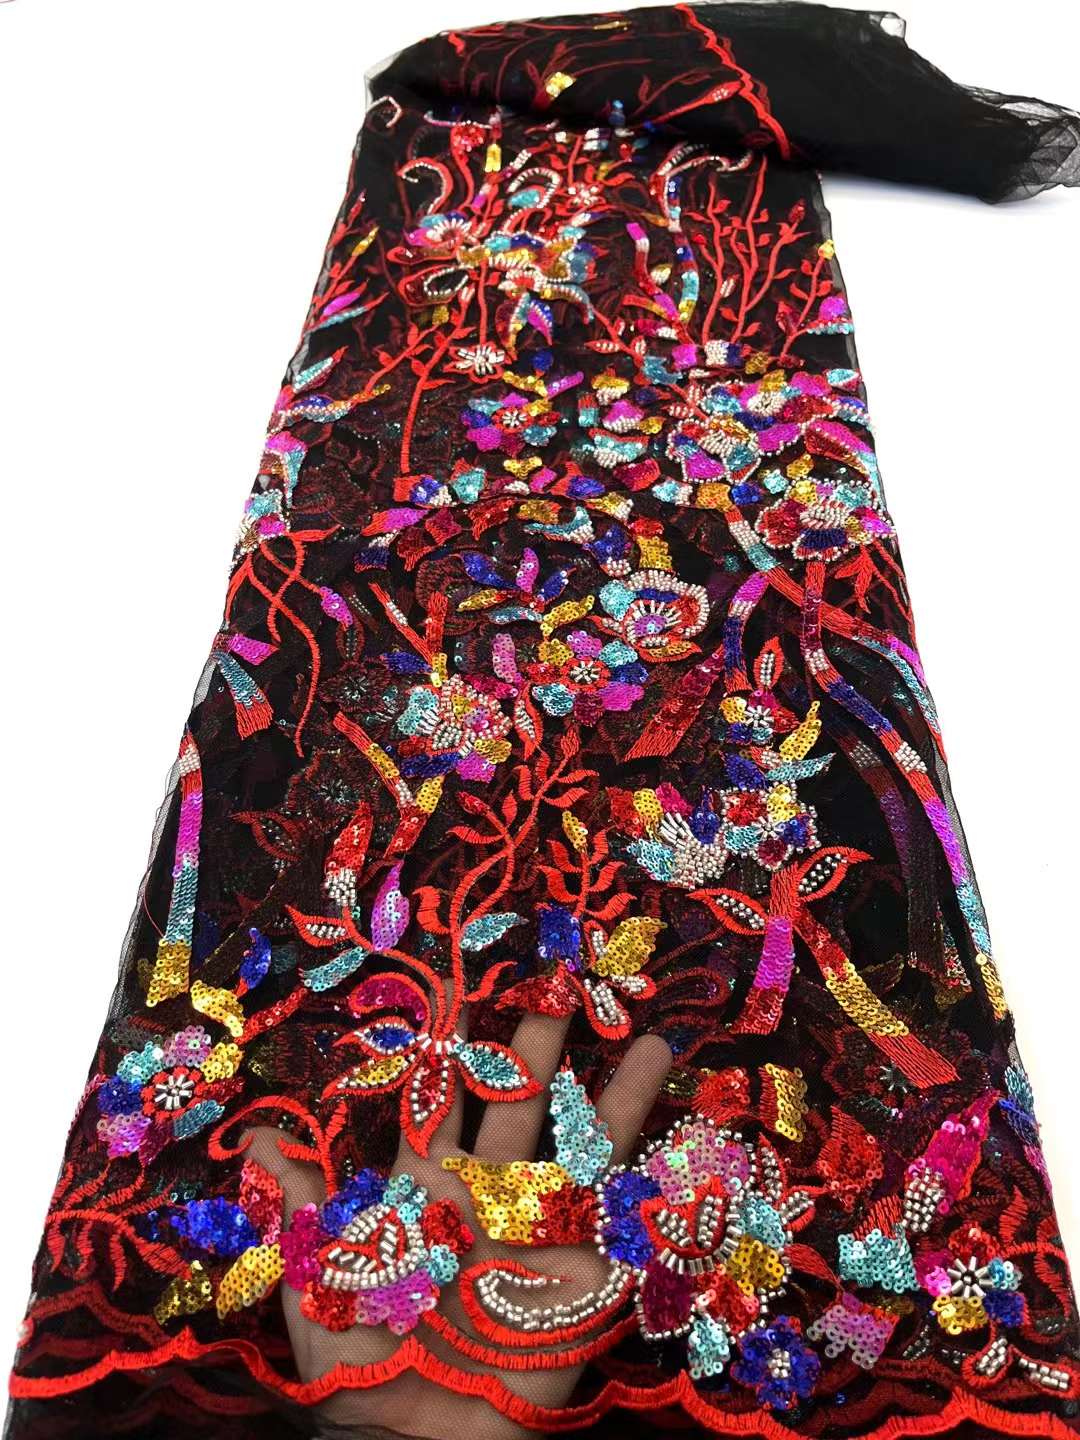 ae / 5 COLORS / Floral Heavy Beads Glitter Embroidered African French Mesh Lace Dress Fabric - Classic & Modern